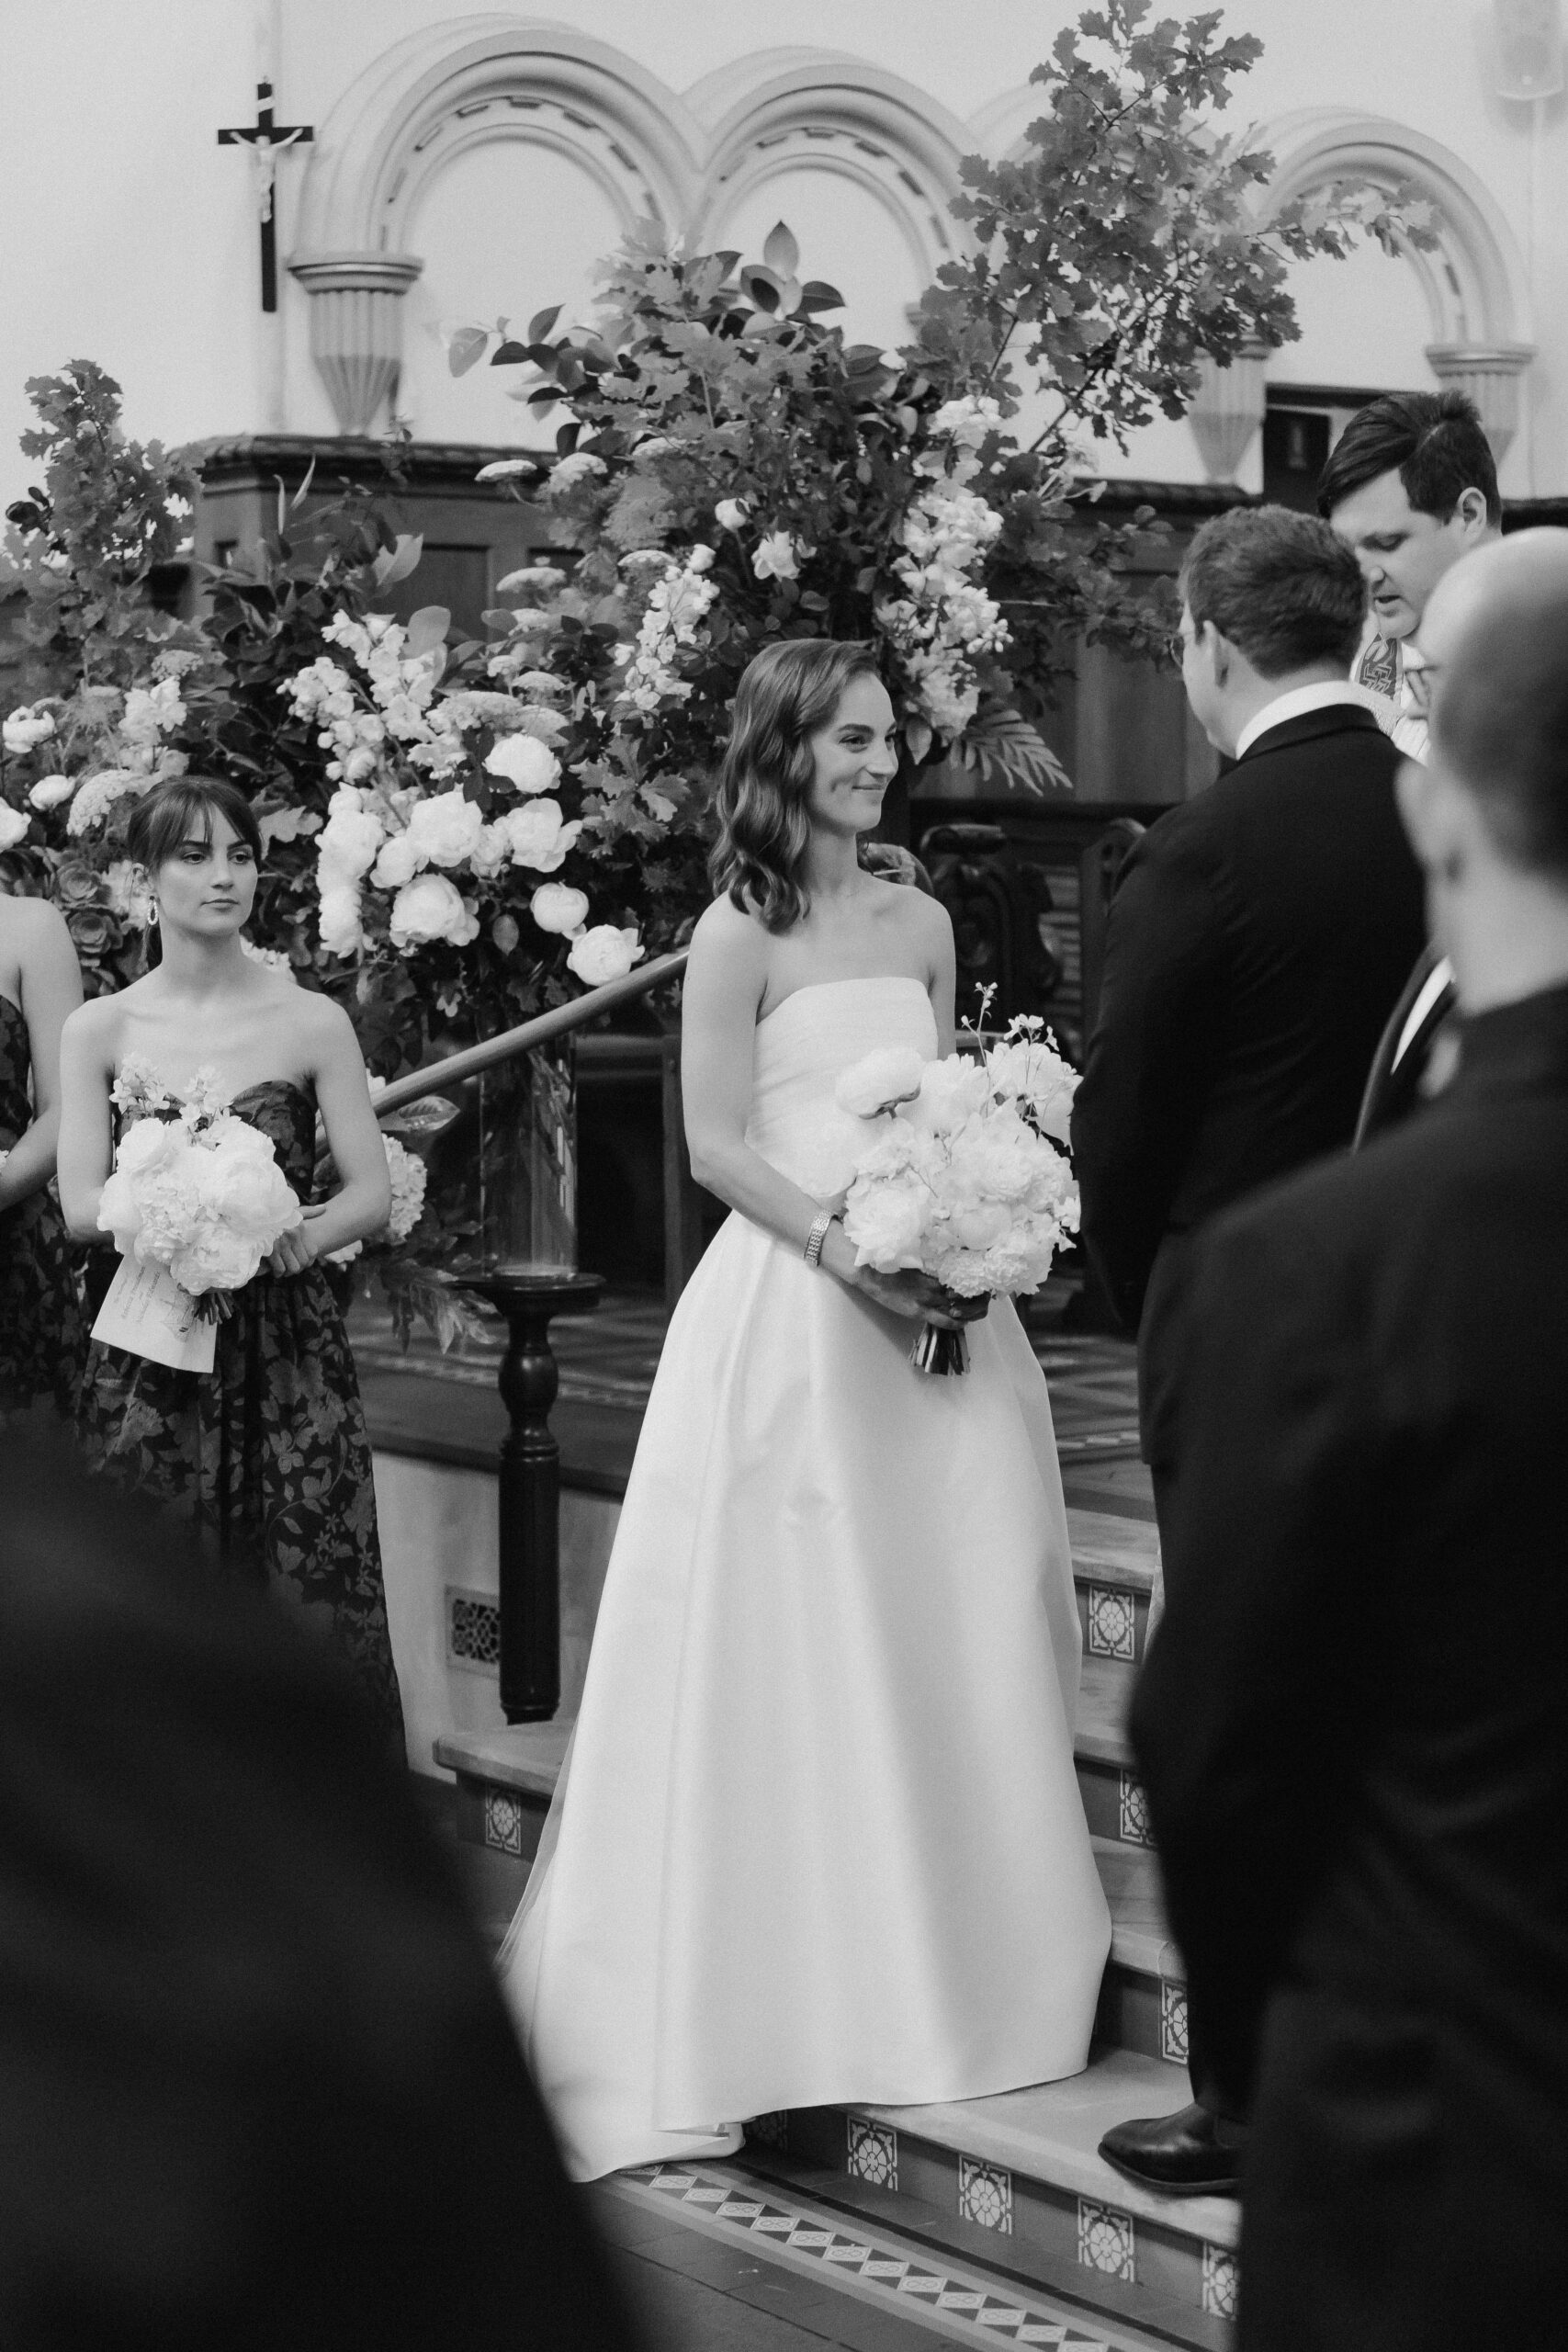 Bride smiling at groom in front of guests